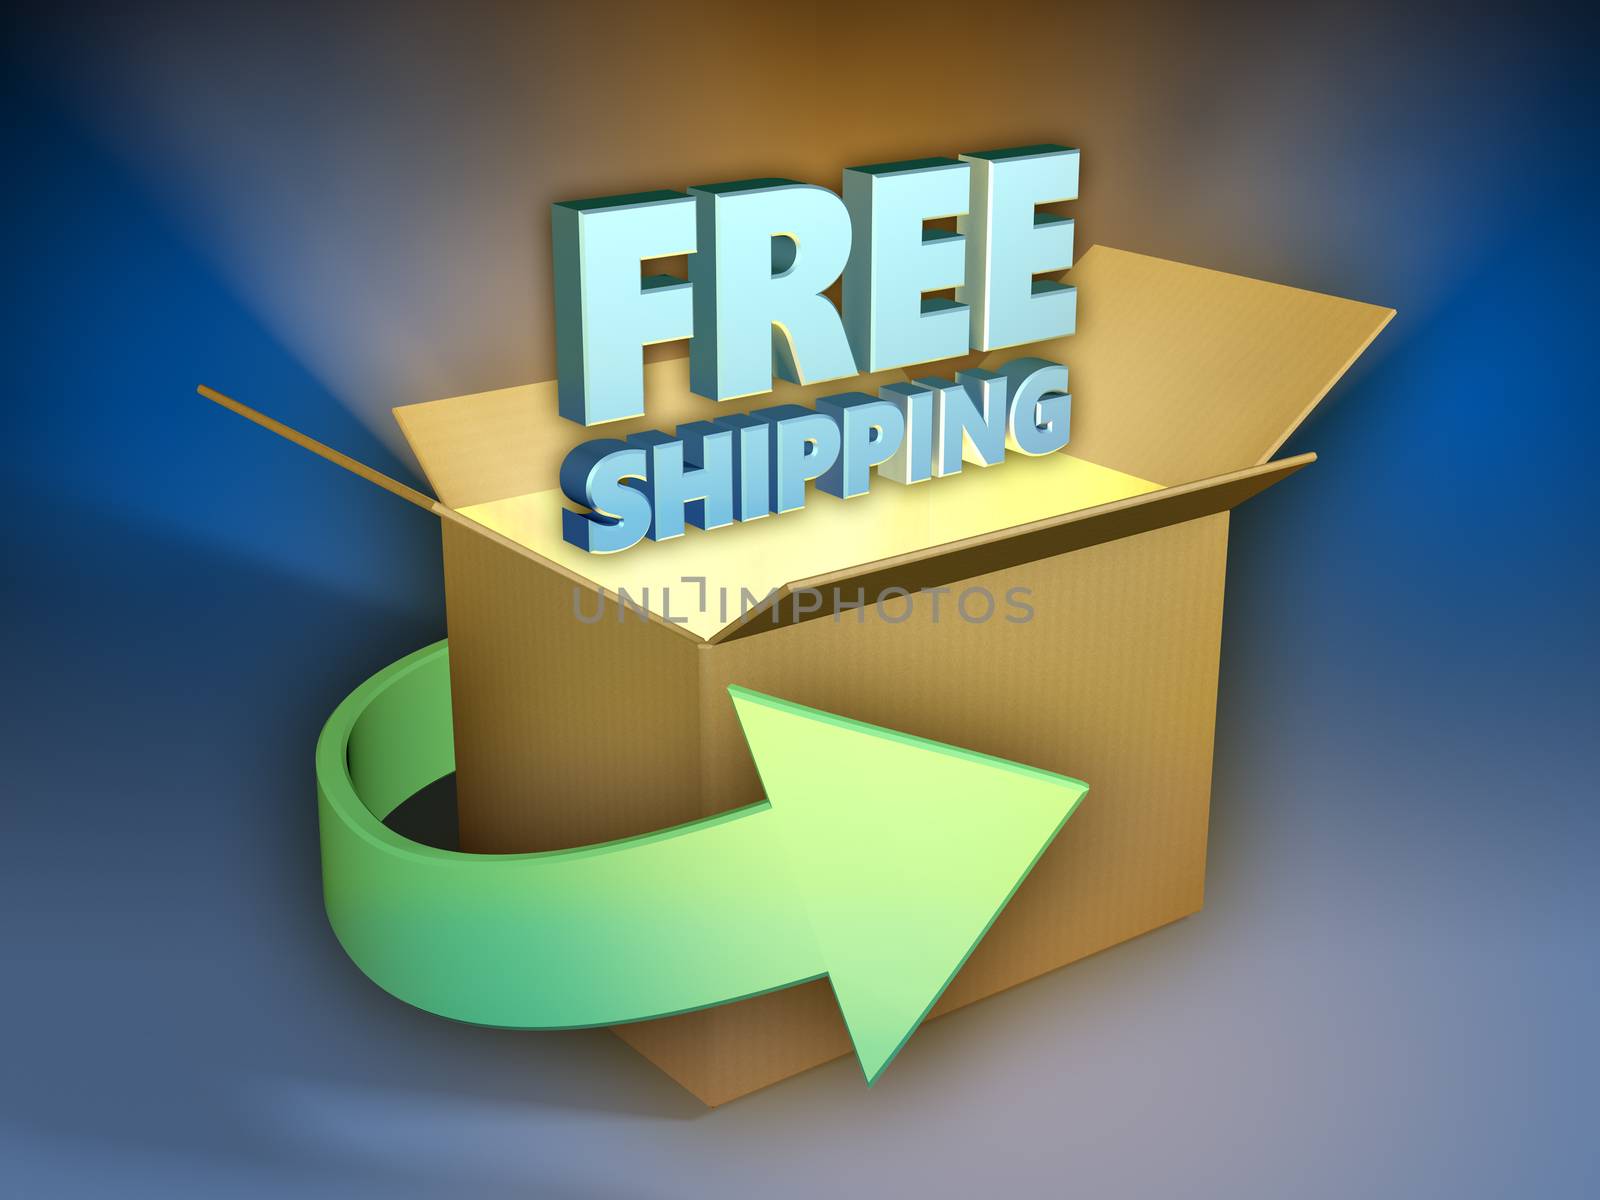 Free shipping by Andreus